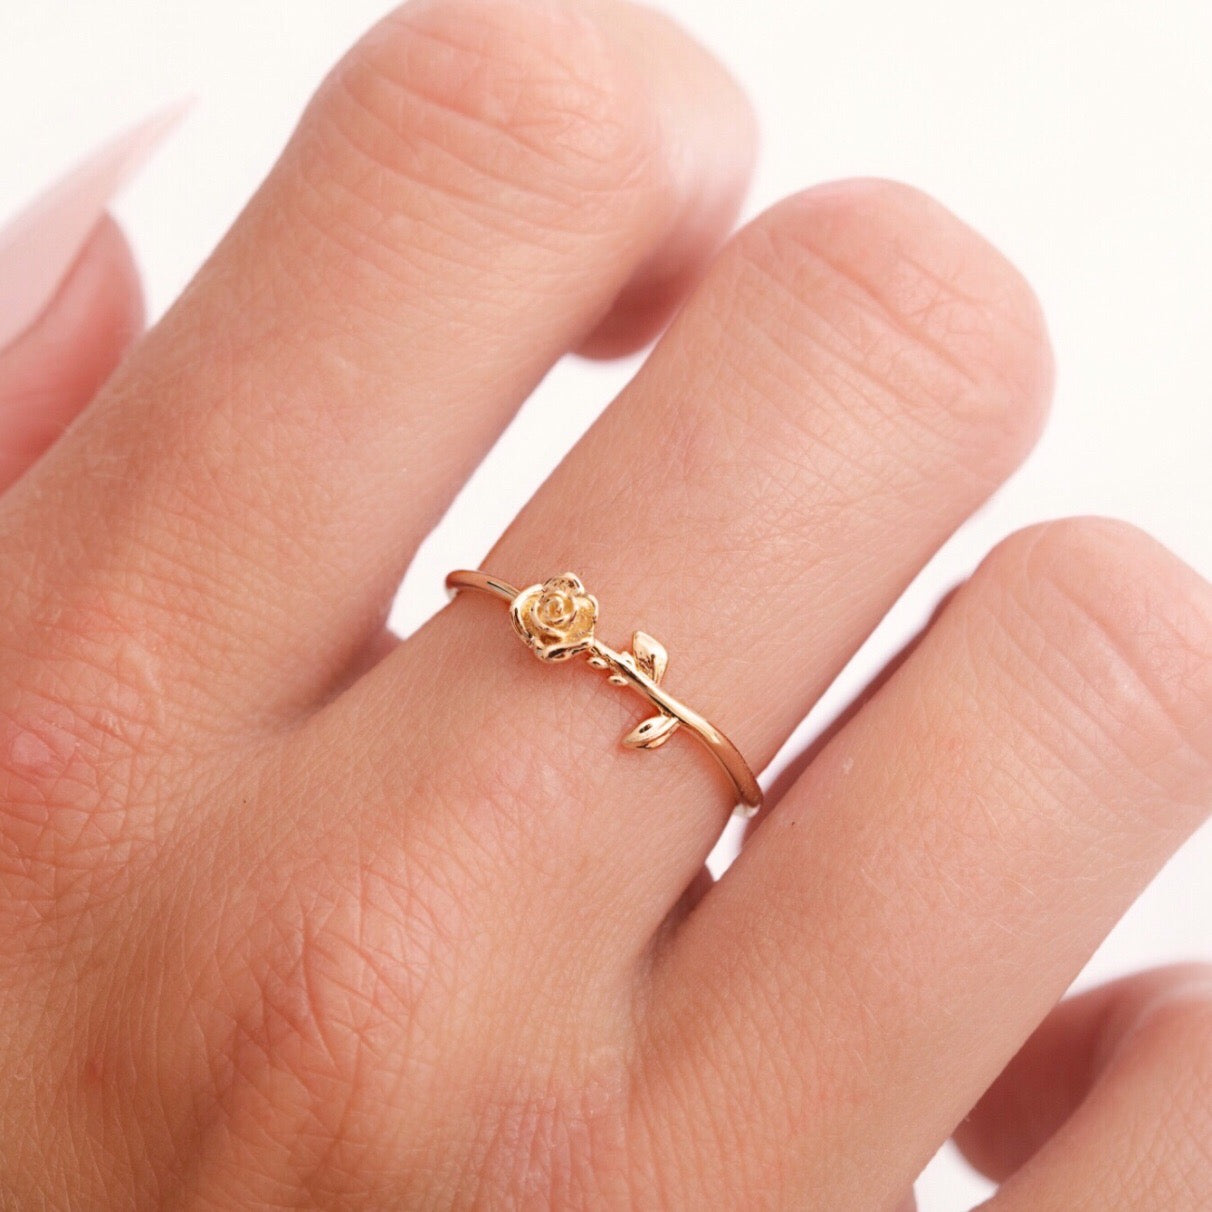 A La Kaiser classic: solid 14kt gold ring with a rose design. Available exclusively in South Africa at Collective and Co online jewelry store